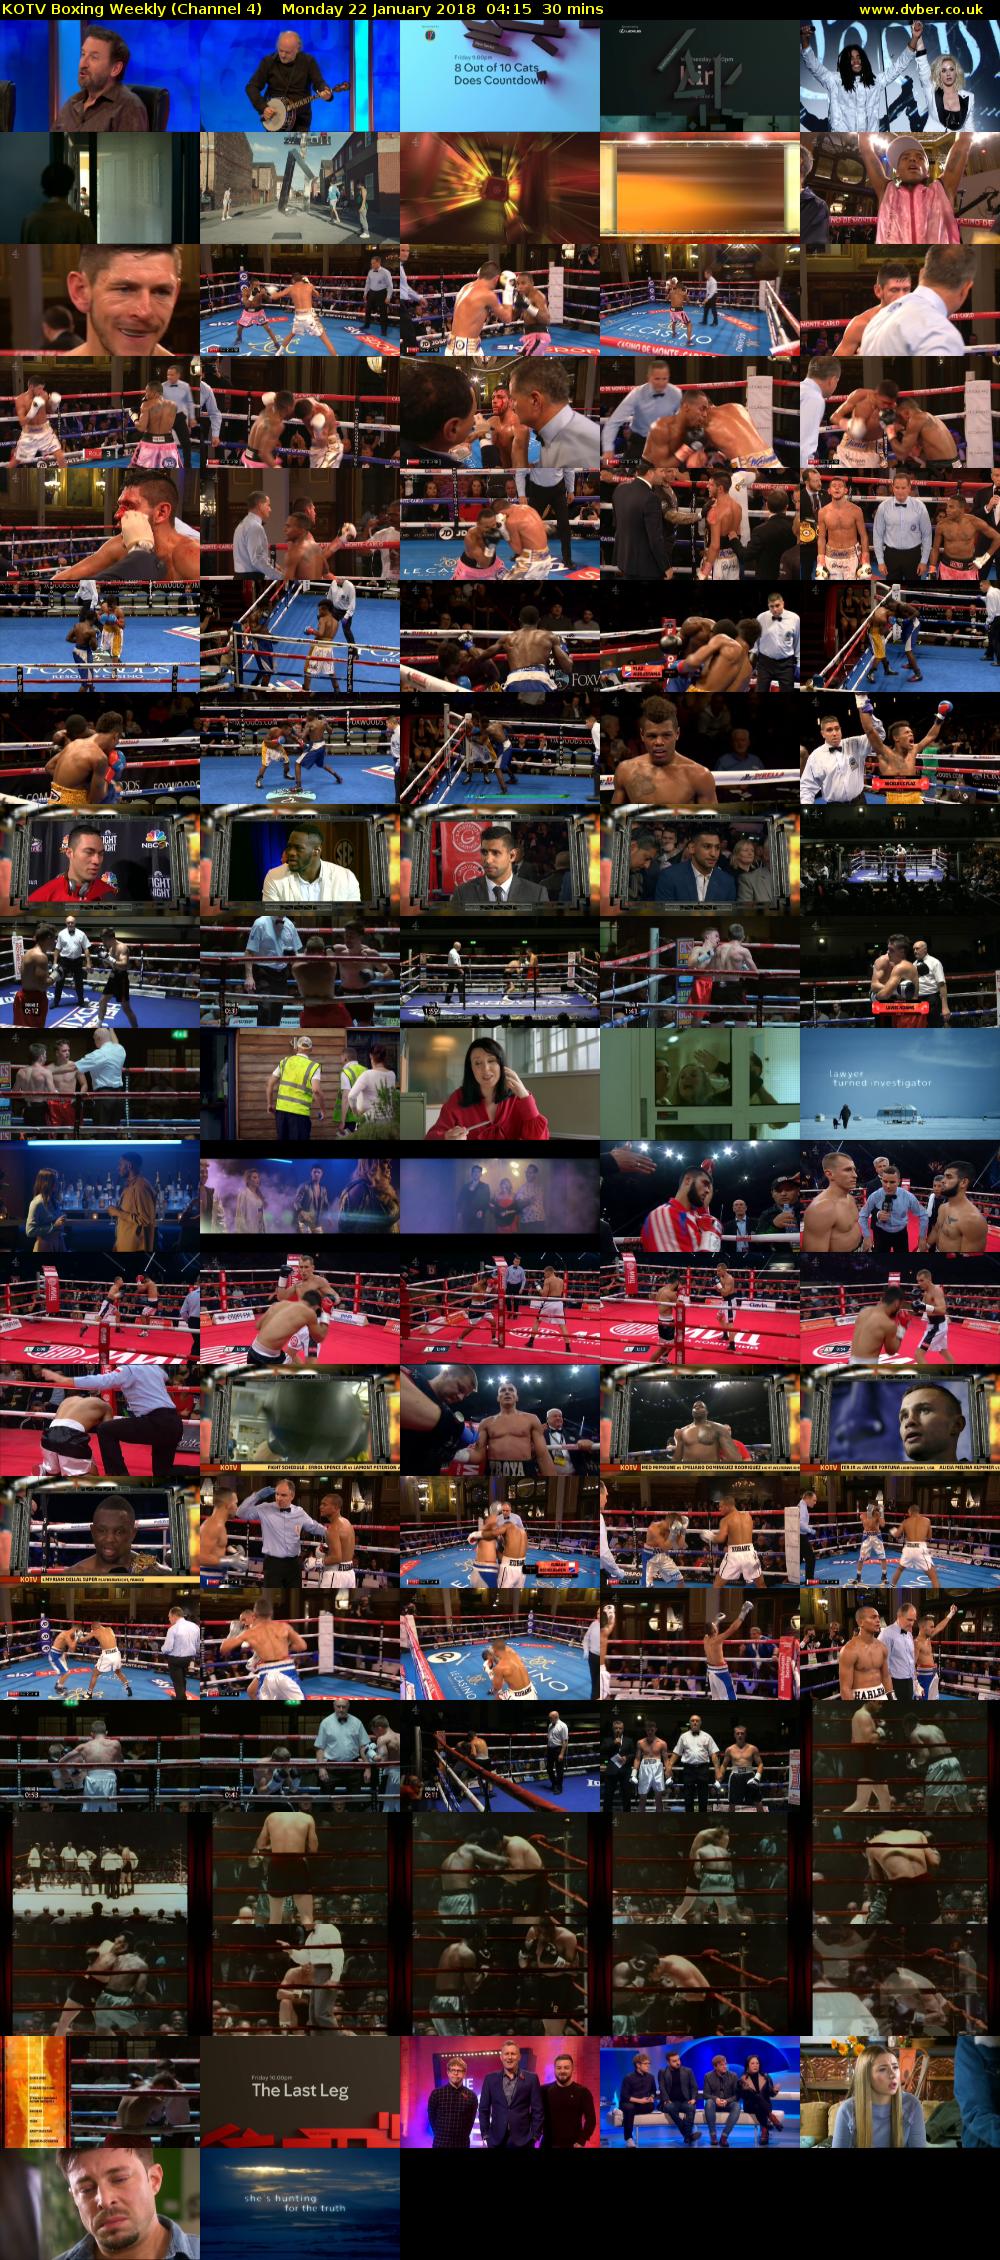 KOTV Boxing Weekly (Channel 4) Monday 22 January 2018 04:15 - 04:45